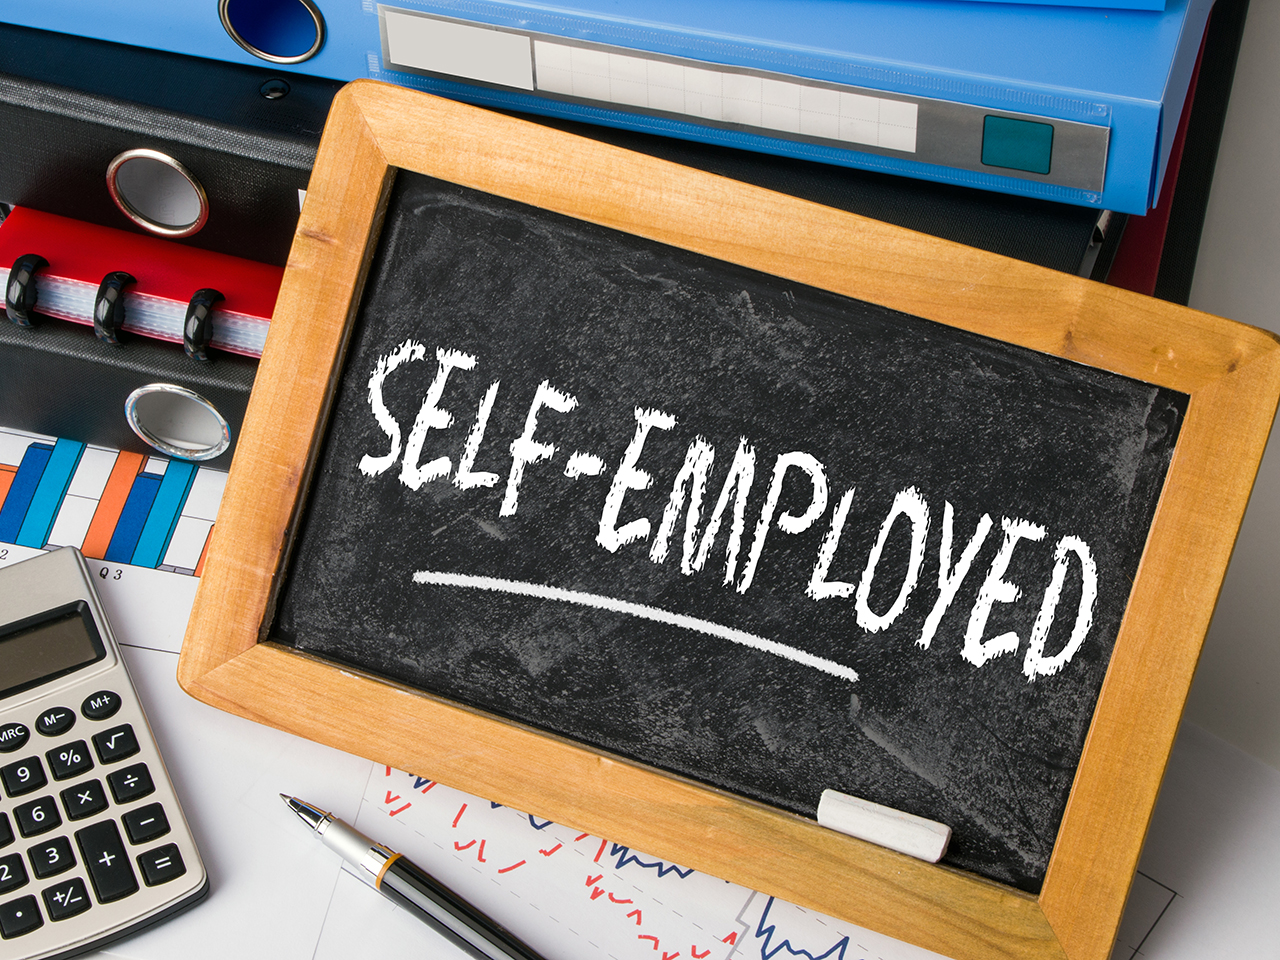 https://apmortgagesolutions.co.uk/wp-content/uploads/2021/07/self-employed-1.jpg